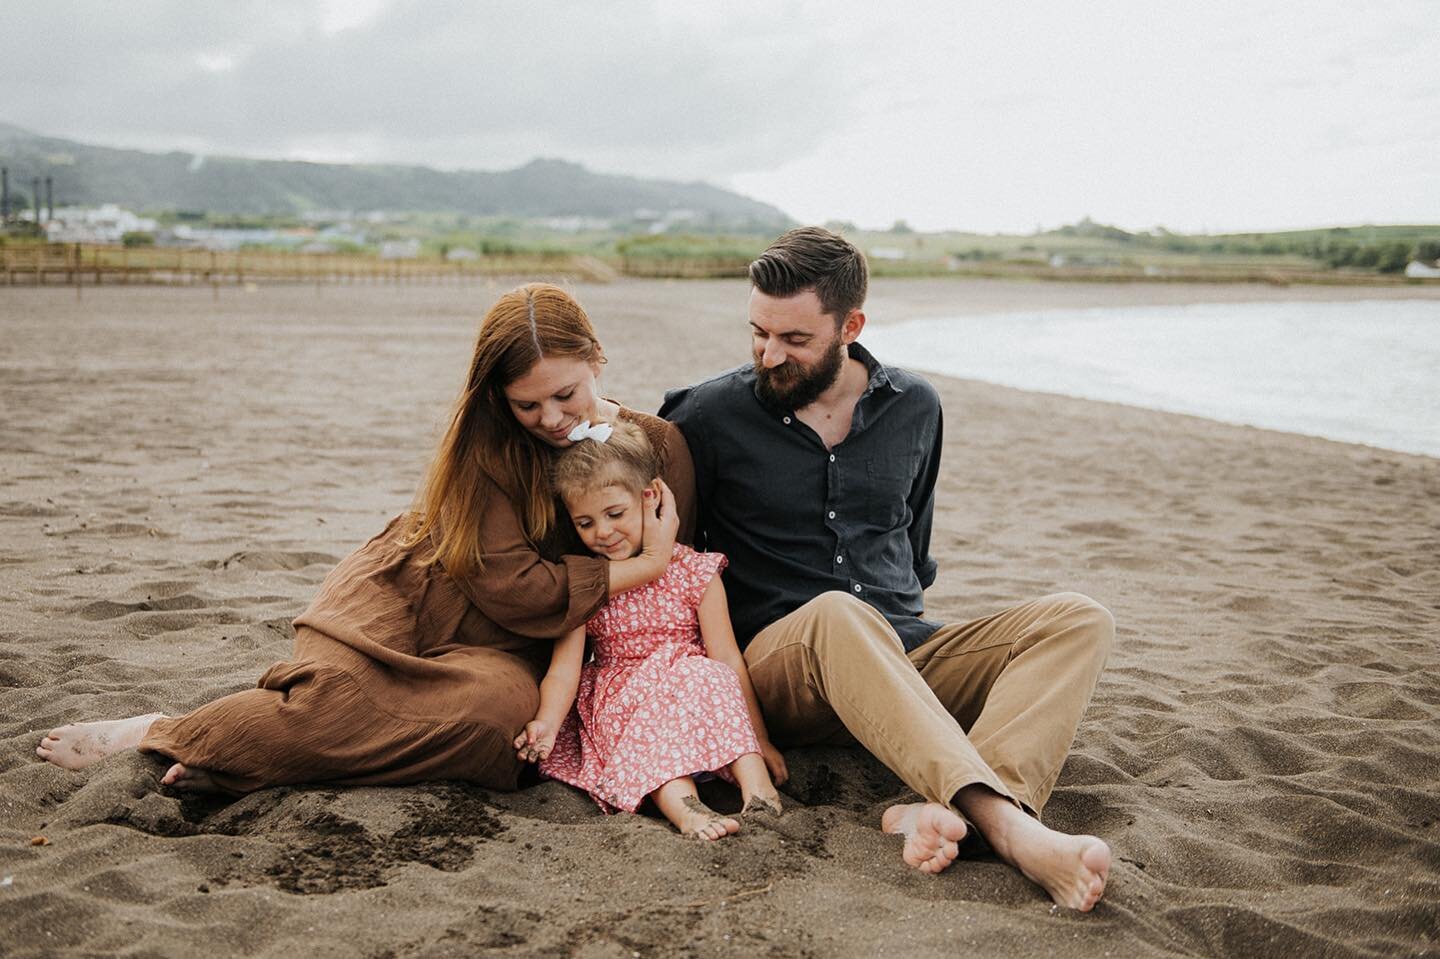 My little family ❤️
📸: @martacabralphoto 

Ava, almost 5 going on 15 with allll the spunk and fire and loads of sweetness 💕 She is silly and kind and oh so smart, and def says the darnedest things 🤪

Chris, the musician, he hates messes (esp sandy